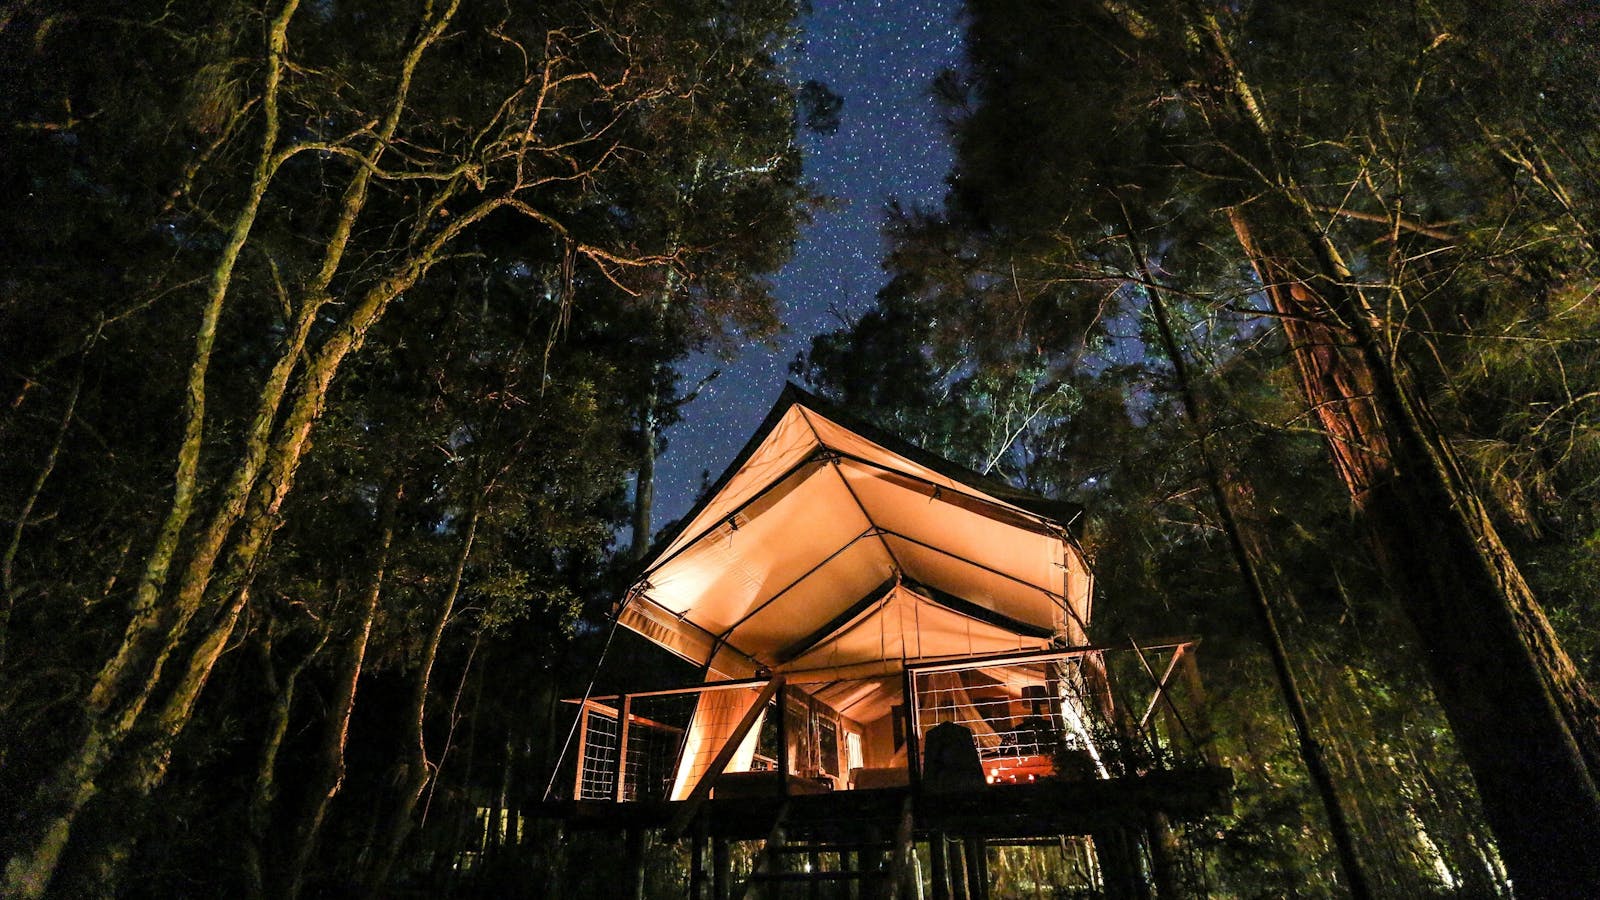 Under a starry sky at Paperbark Camp